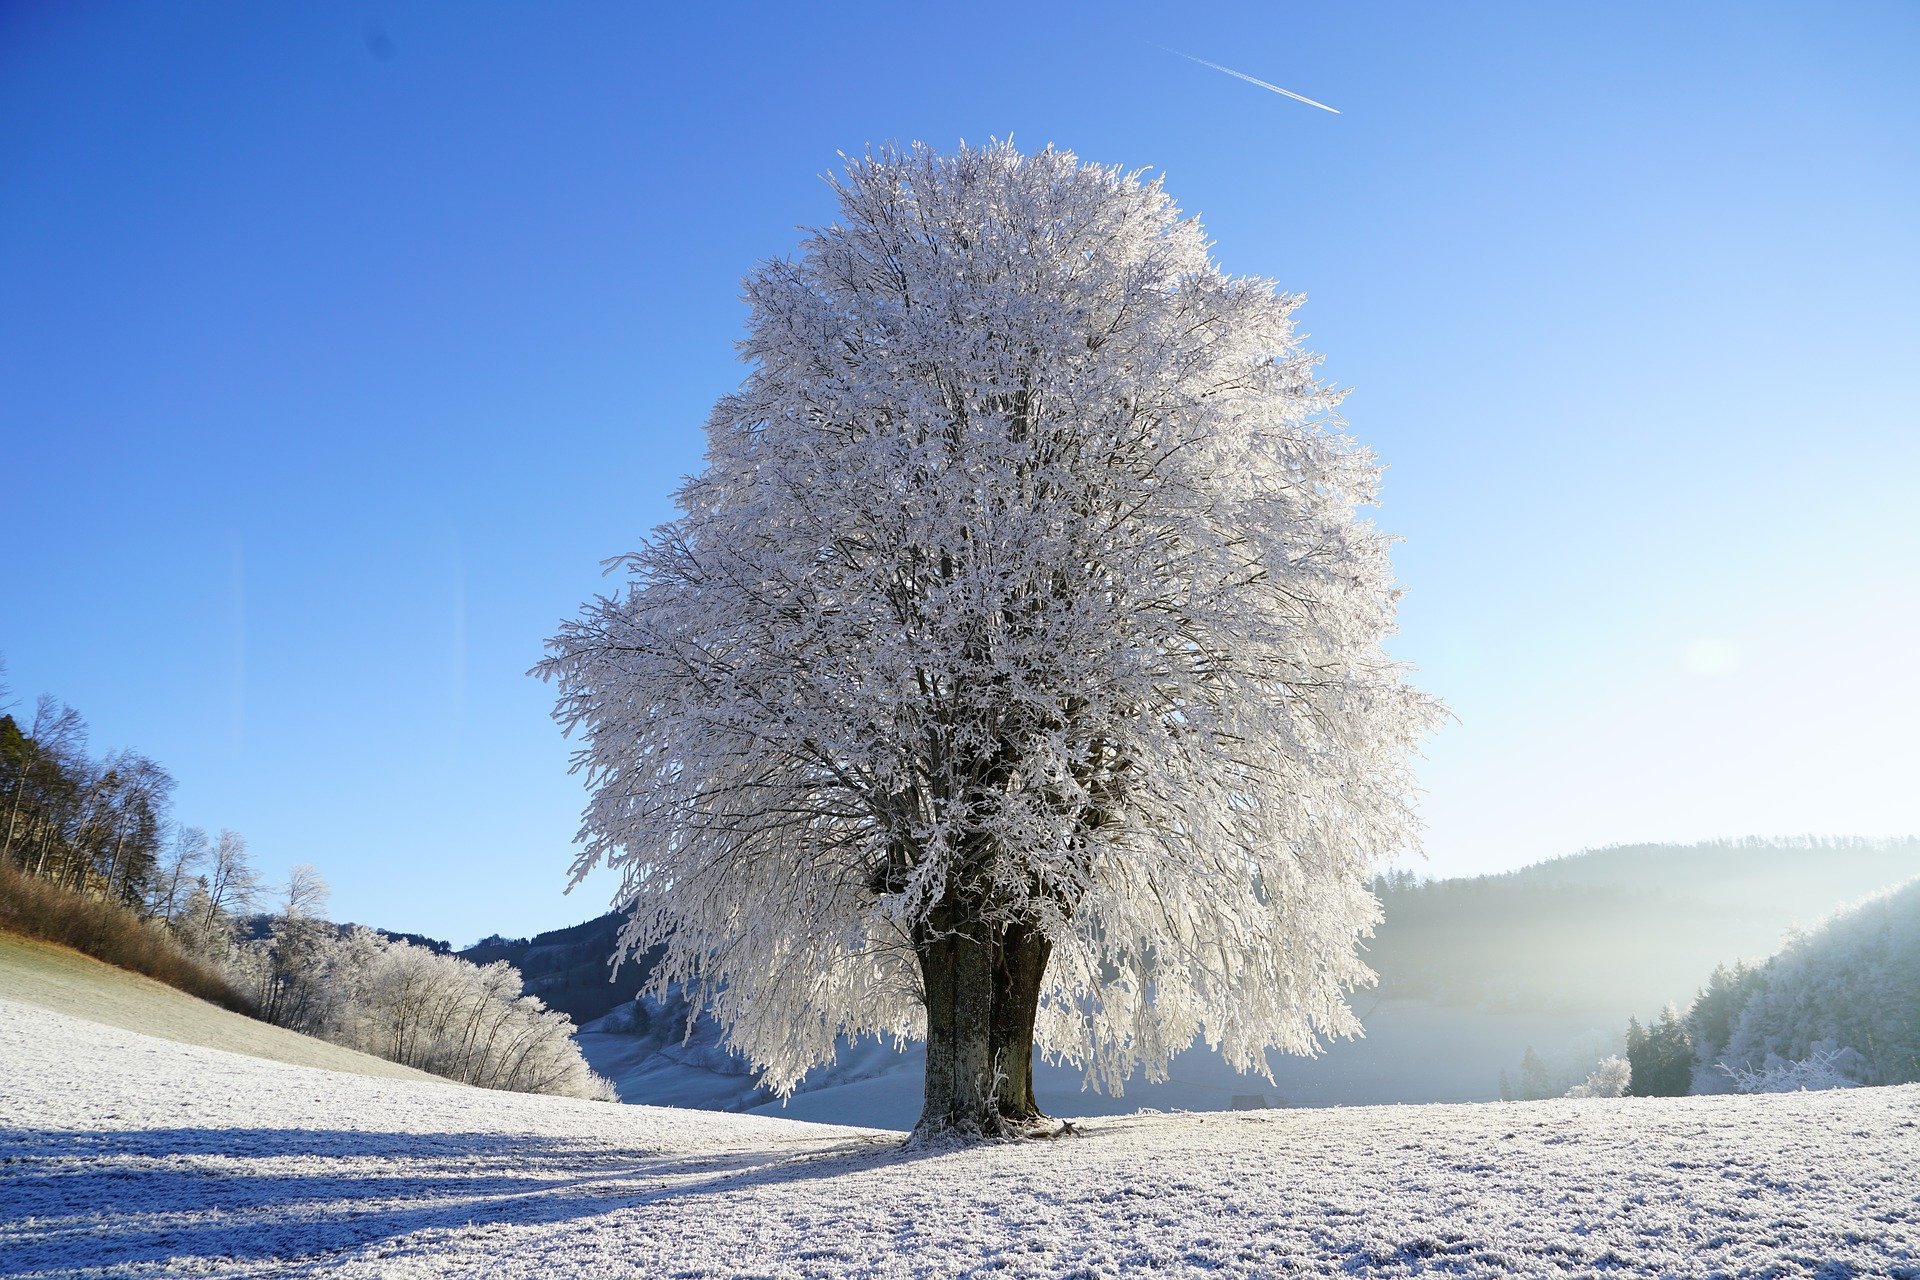 A photo of a large frosty tree in the snow